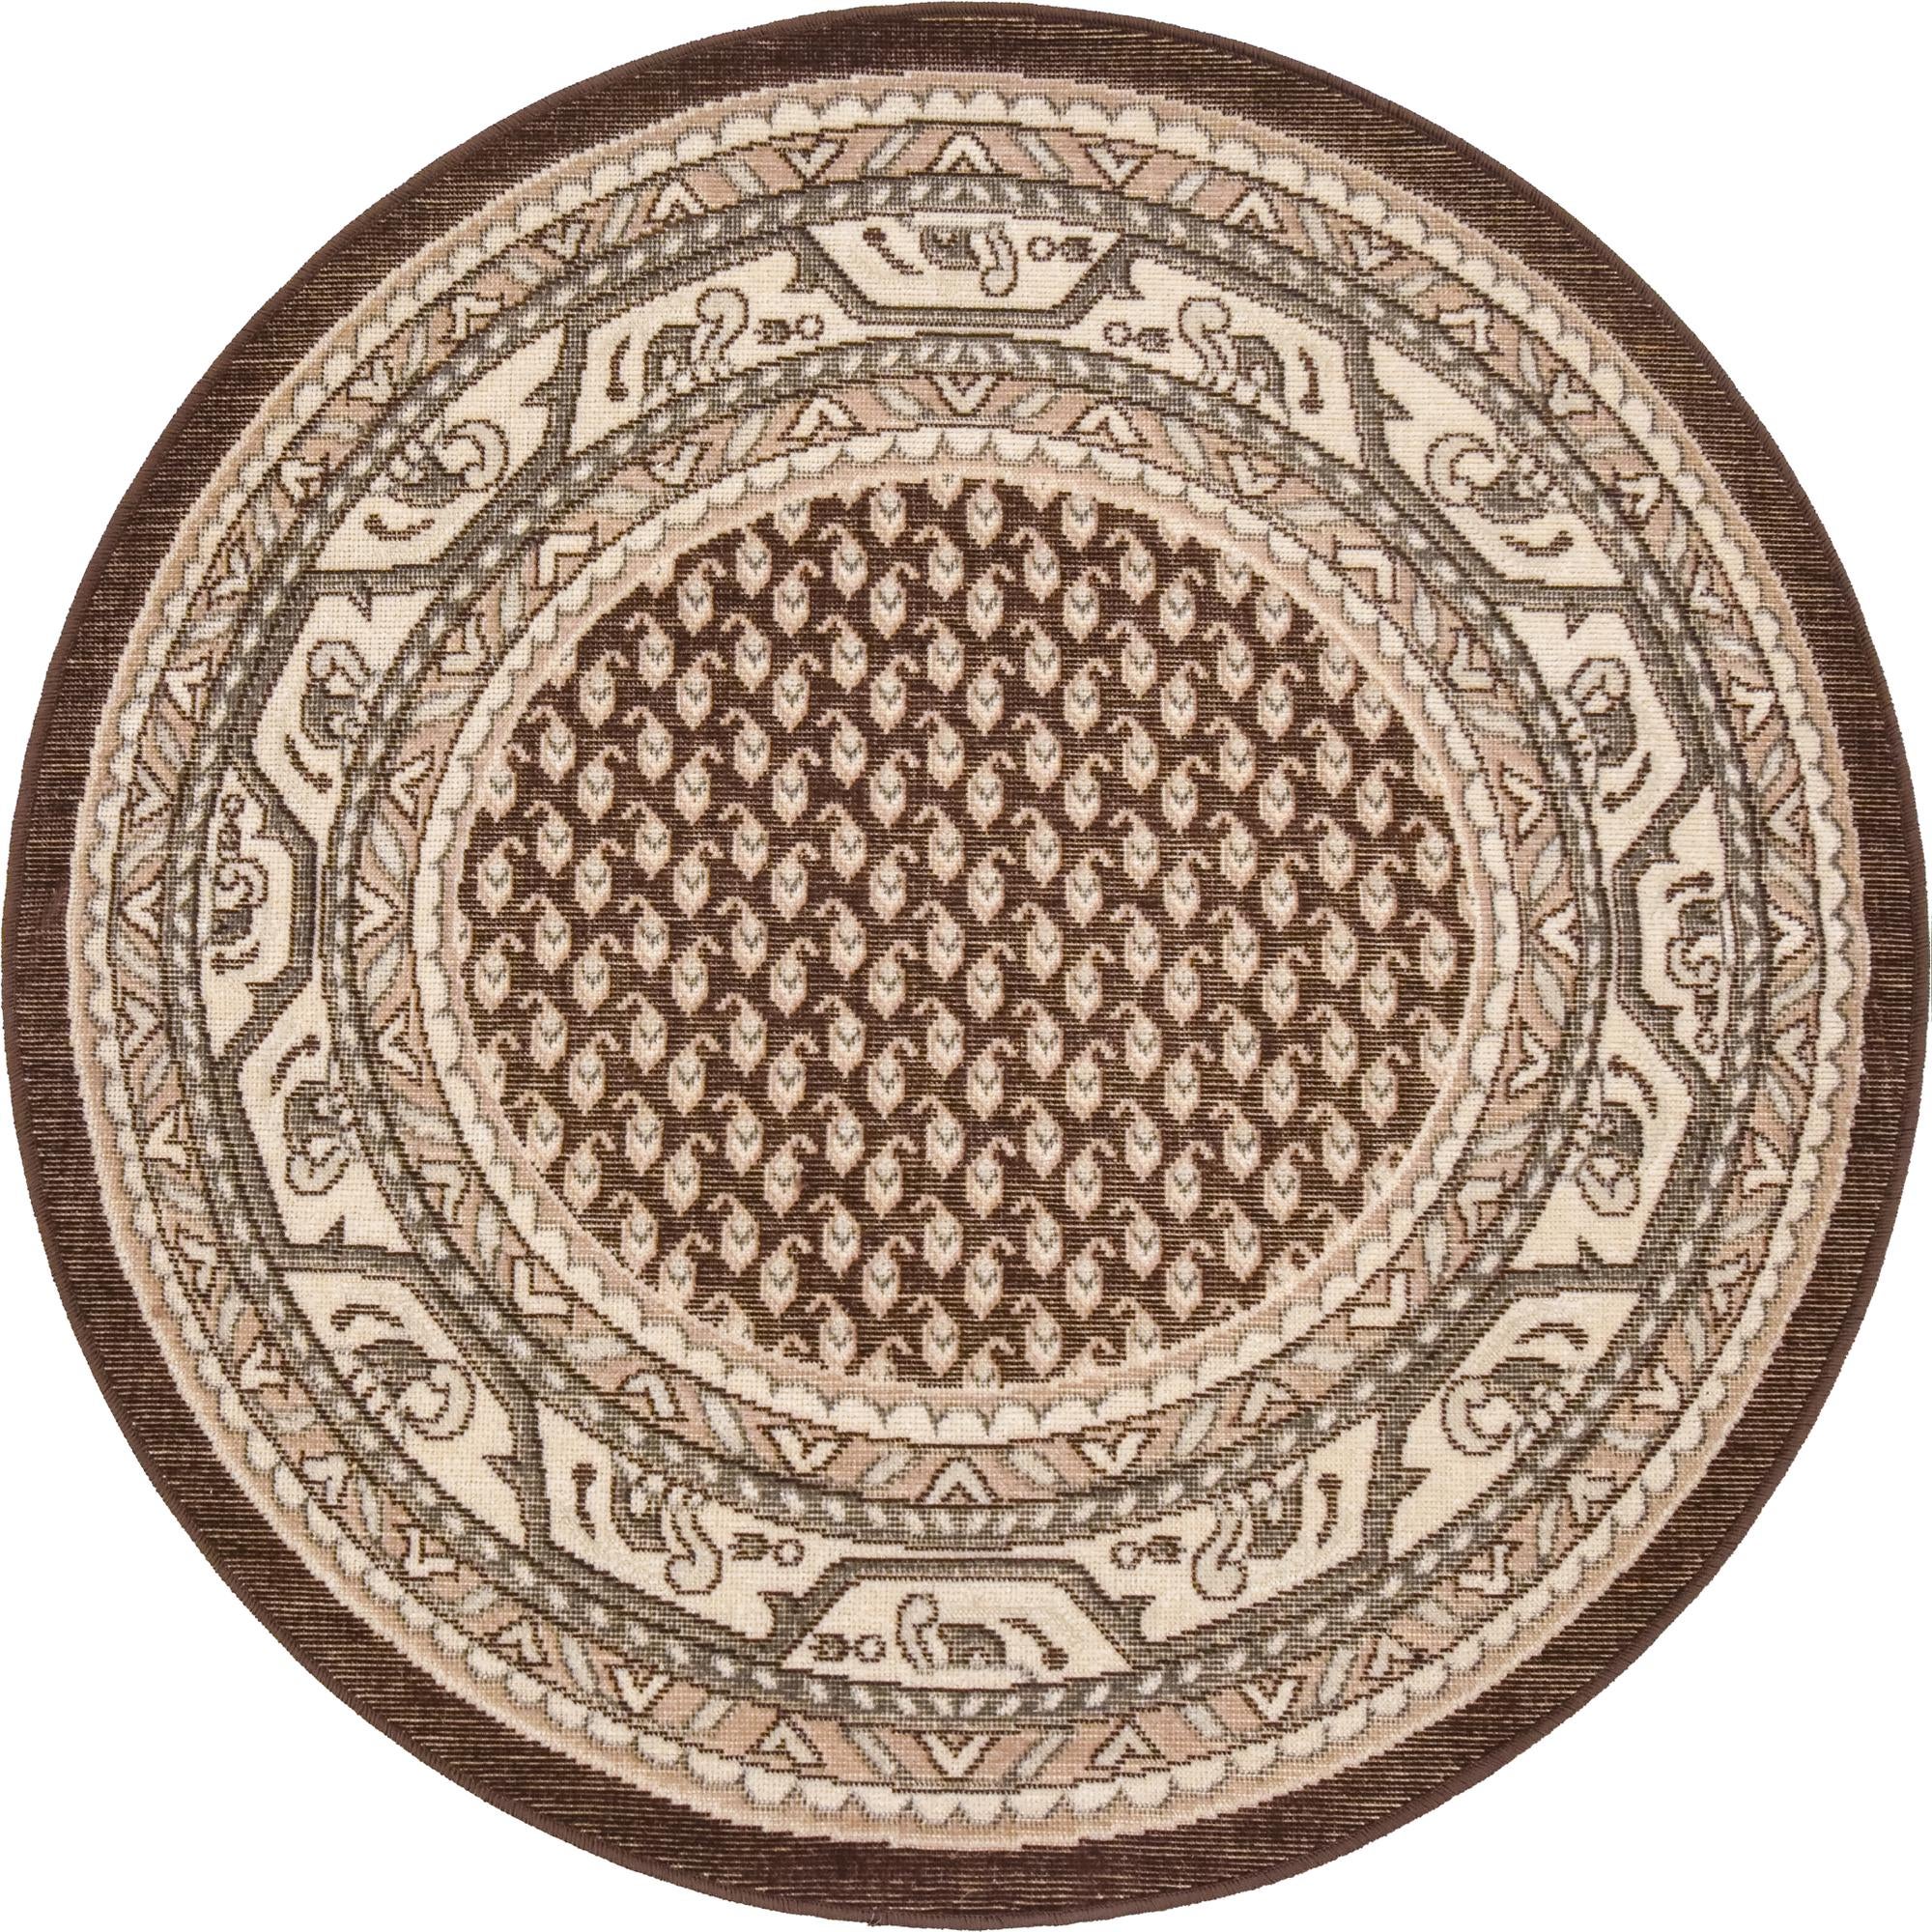 Unique Loom Allover Williamsburg Rug Brown/Beige 3' 7" Round Hand Made Geometric Traditional Perfect For Dining Room Entryway Bed Room Kids Room - image 3 of 3